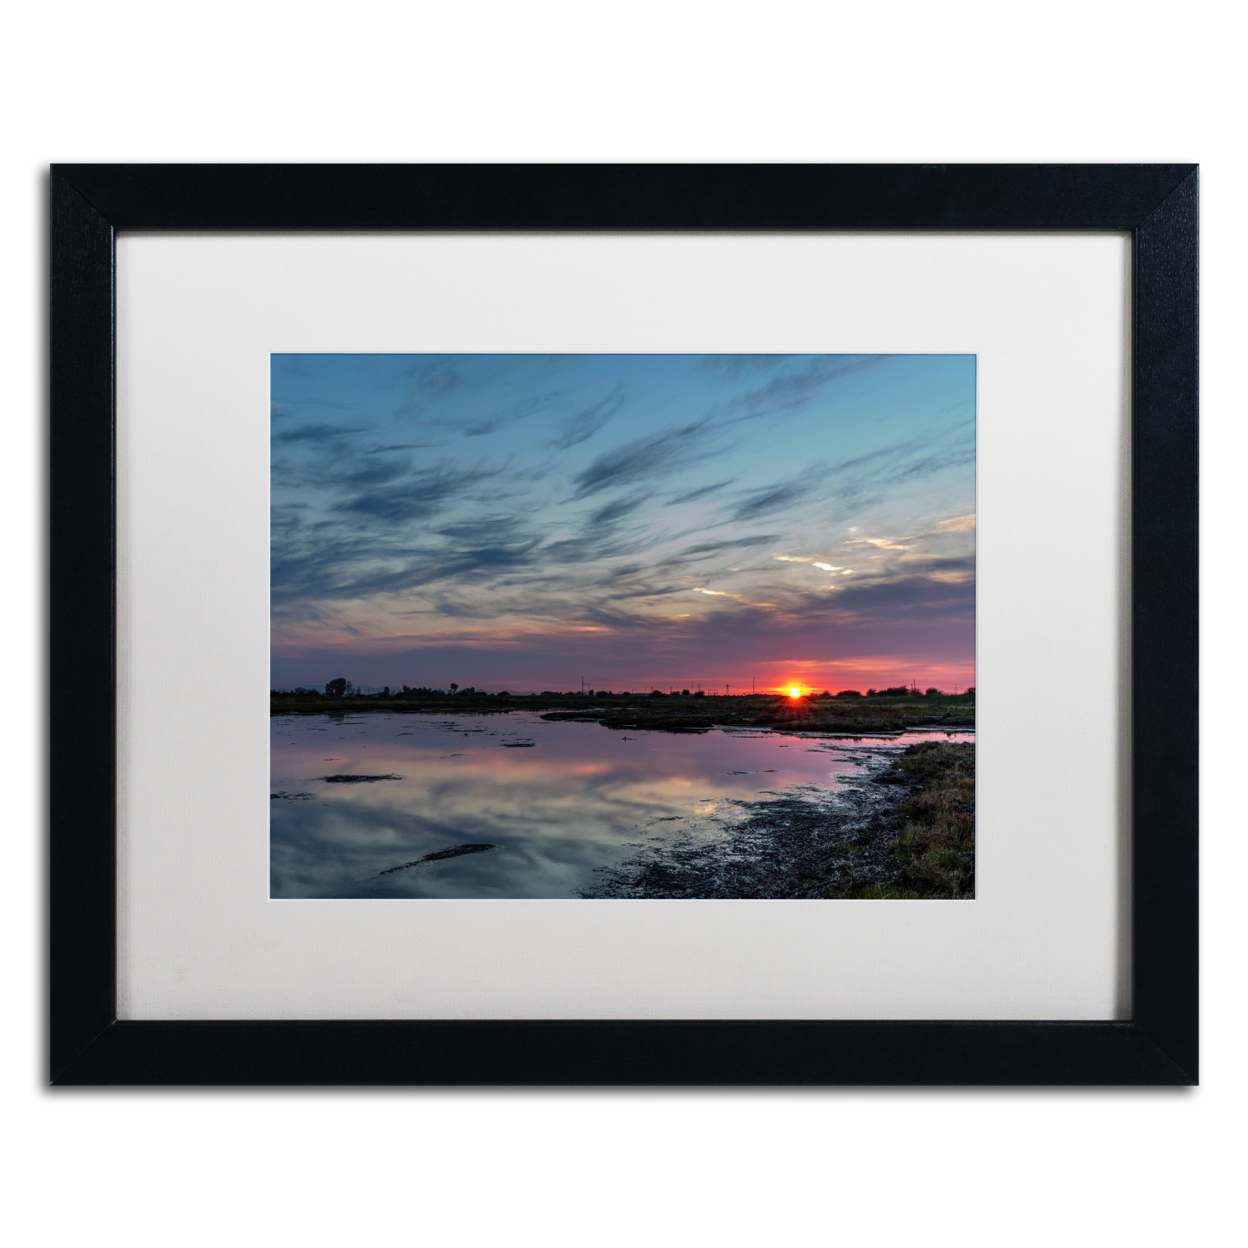 Pierre Leclerc 'Boundary Bay Sunset 2' Black Wooden Framed Art 18 X 22 Inches